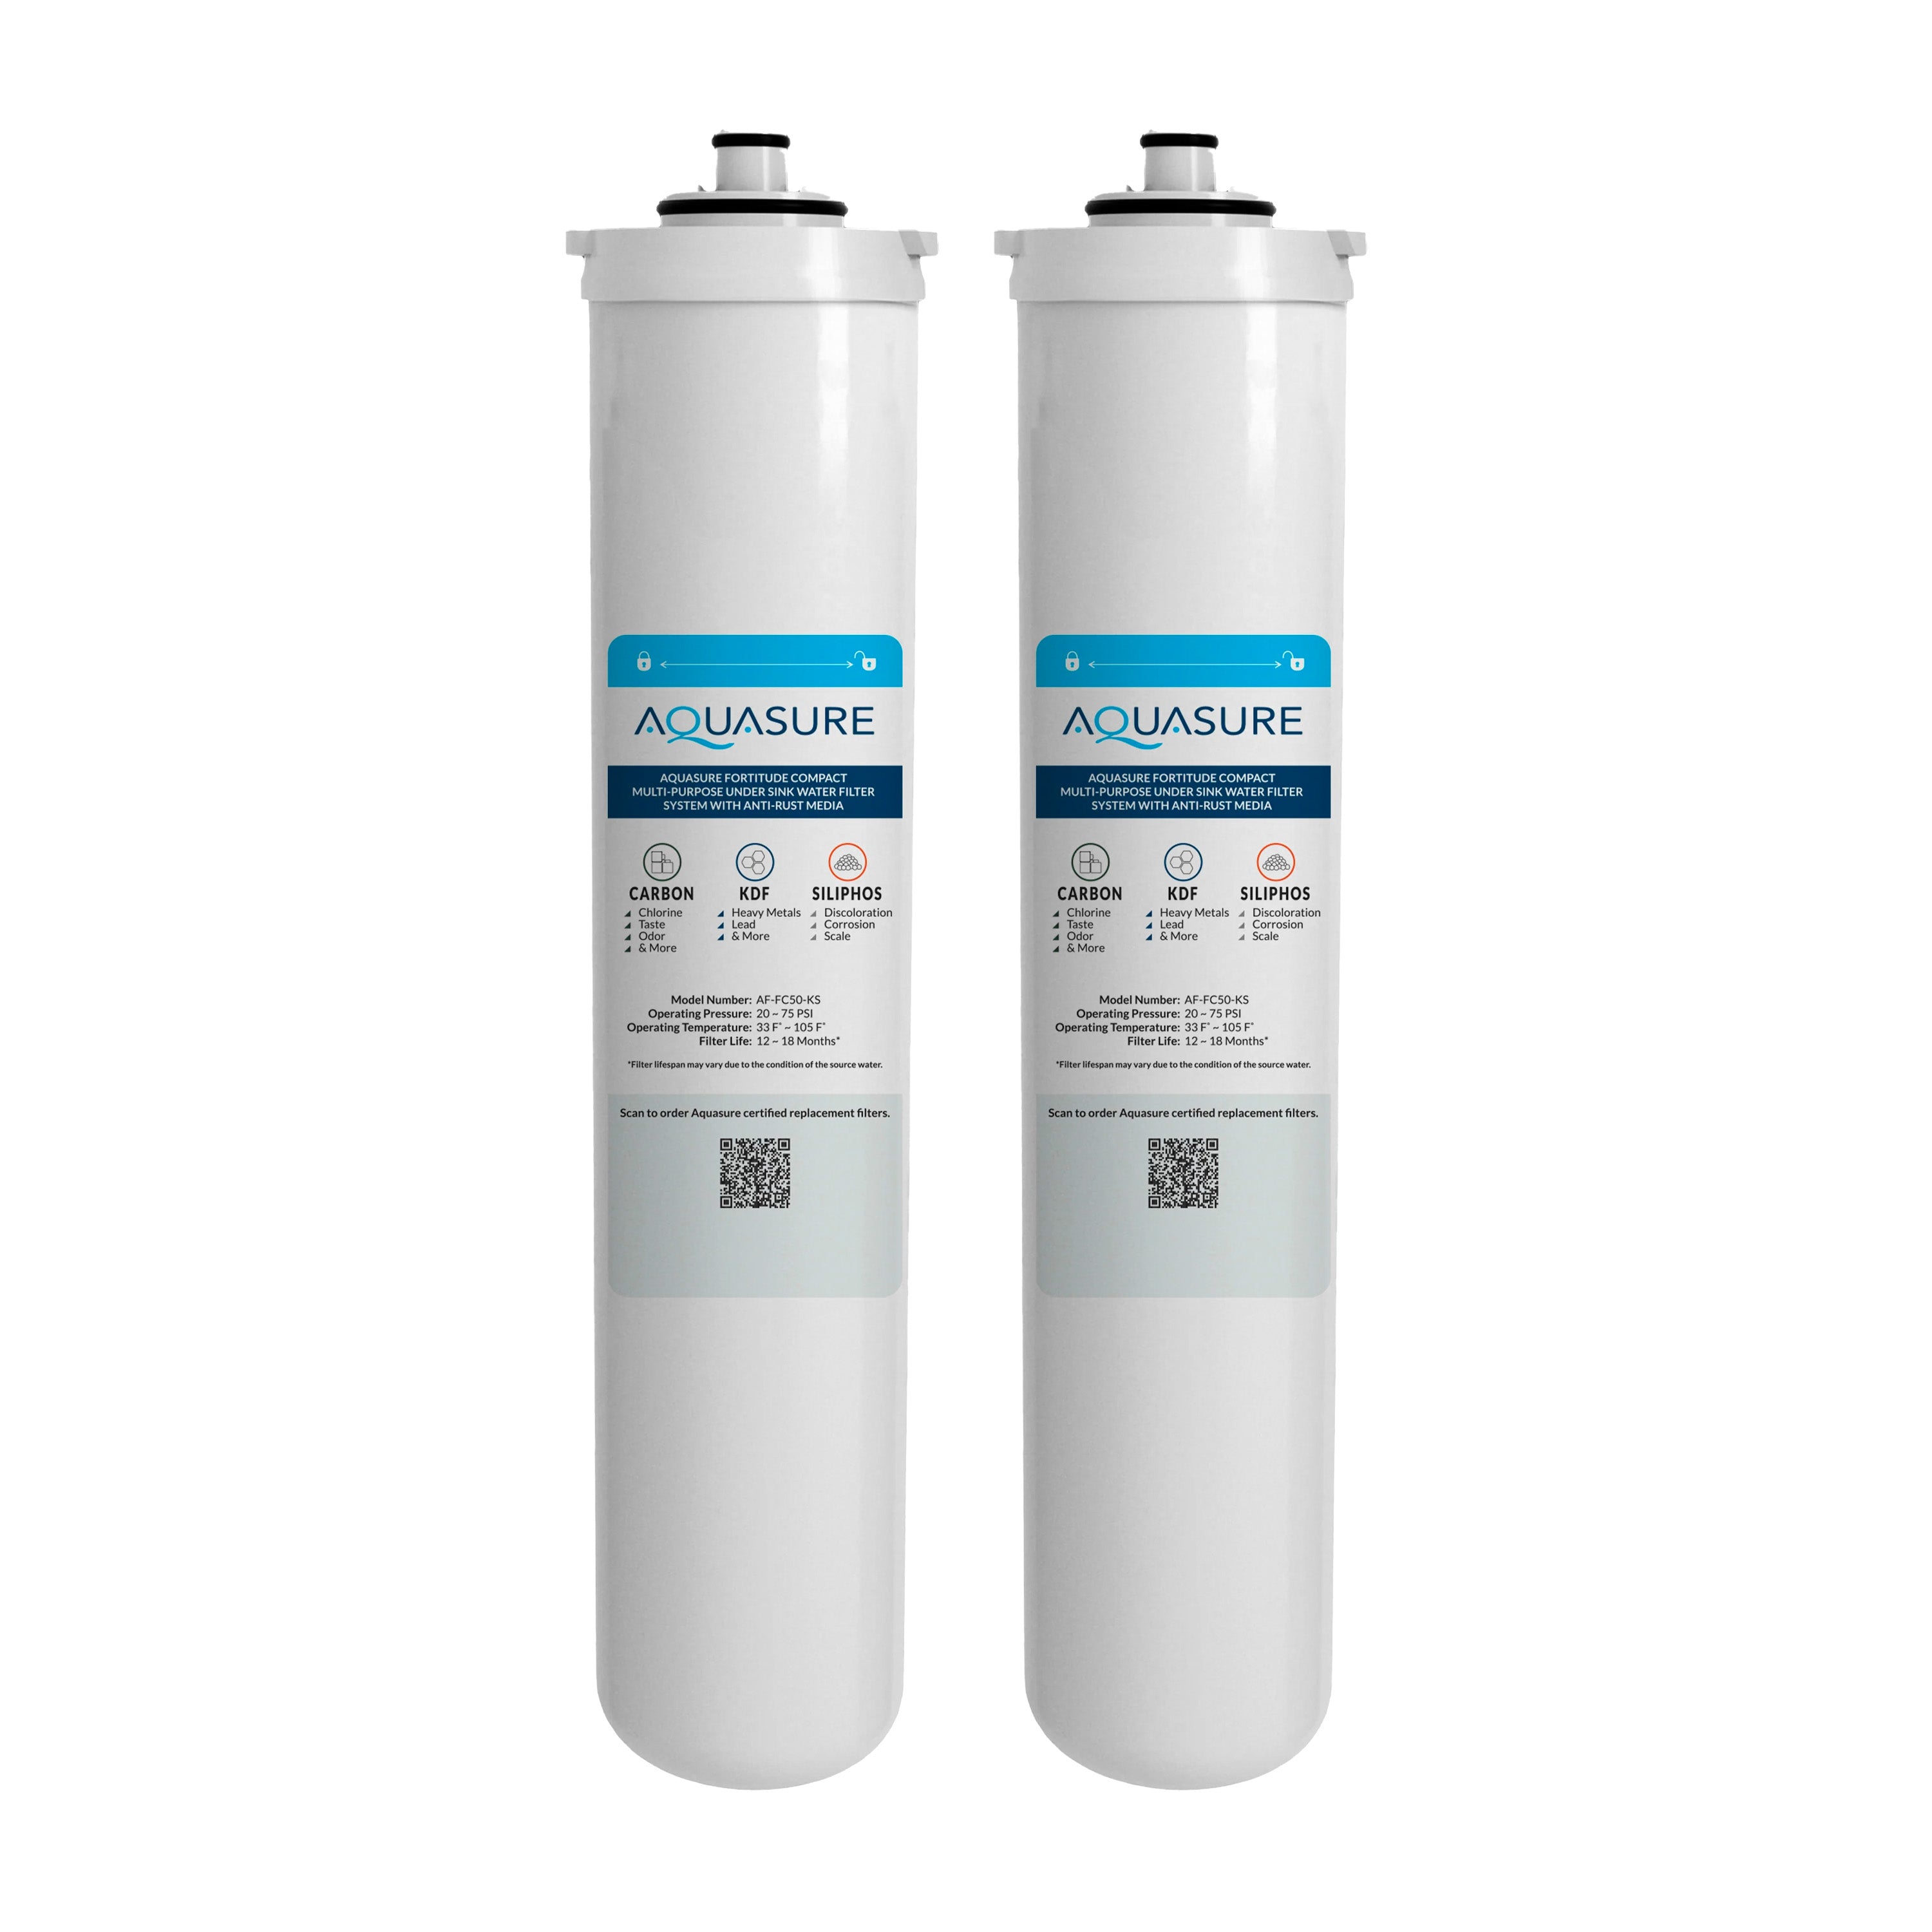 Aquasure Fortitude Compact Multi-Purpose Under Sink Water Filter System with Anti-Rust Media Replacement Filter (2-Pack)